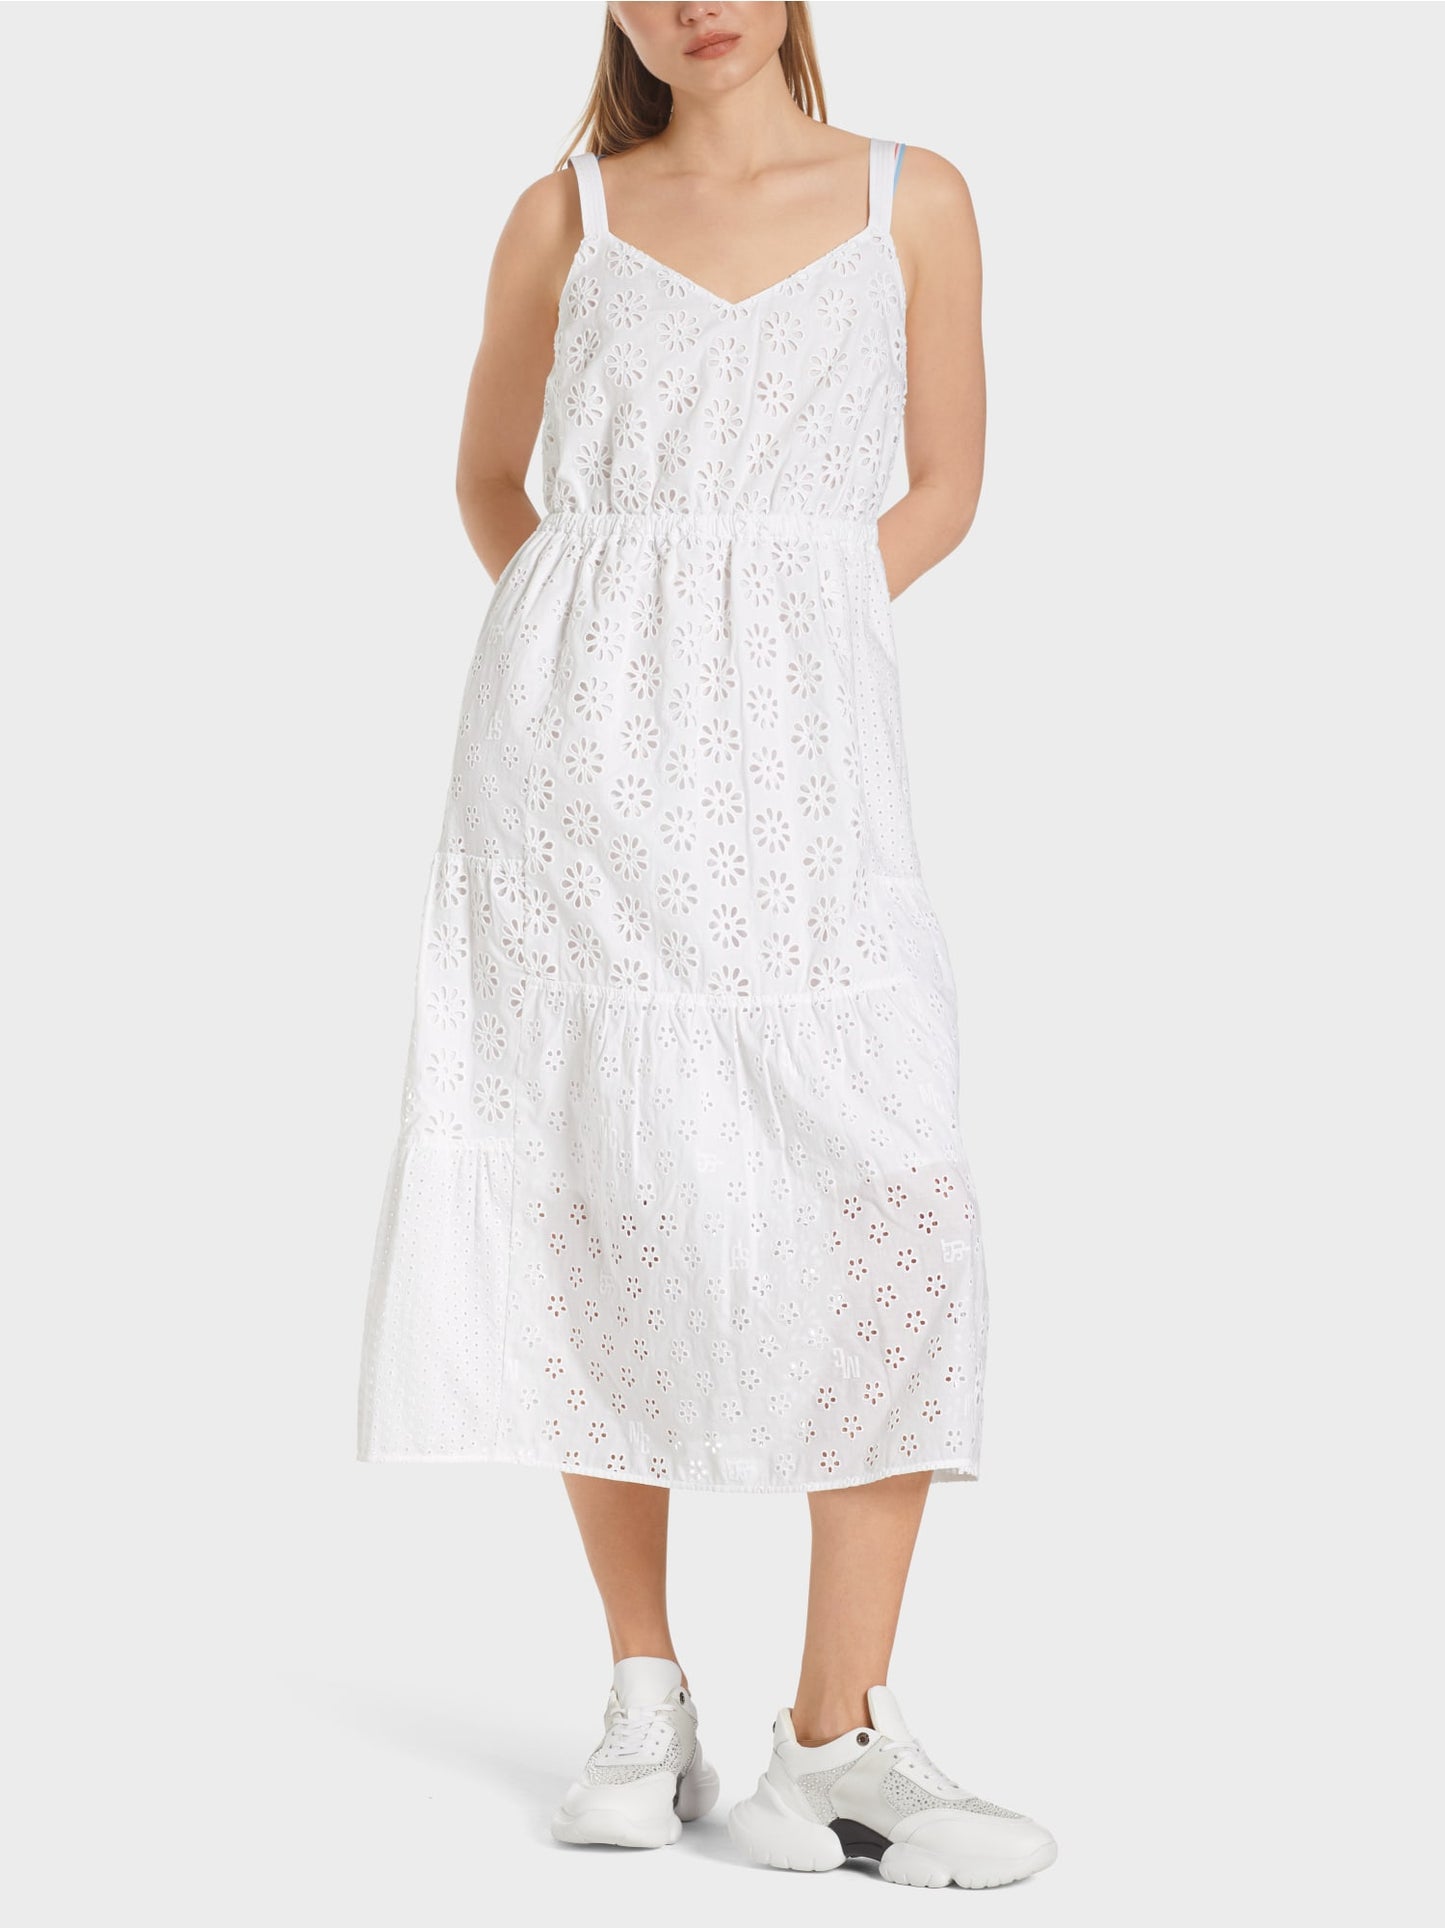 Summer dress with eyelet embroidery